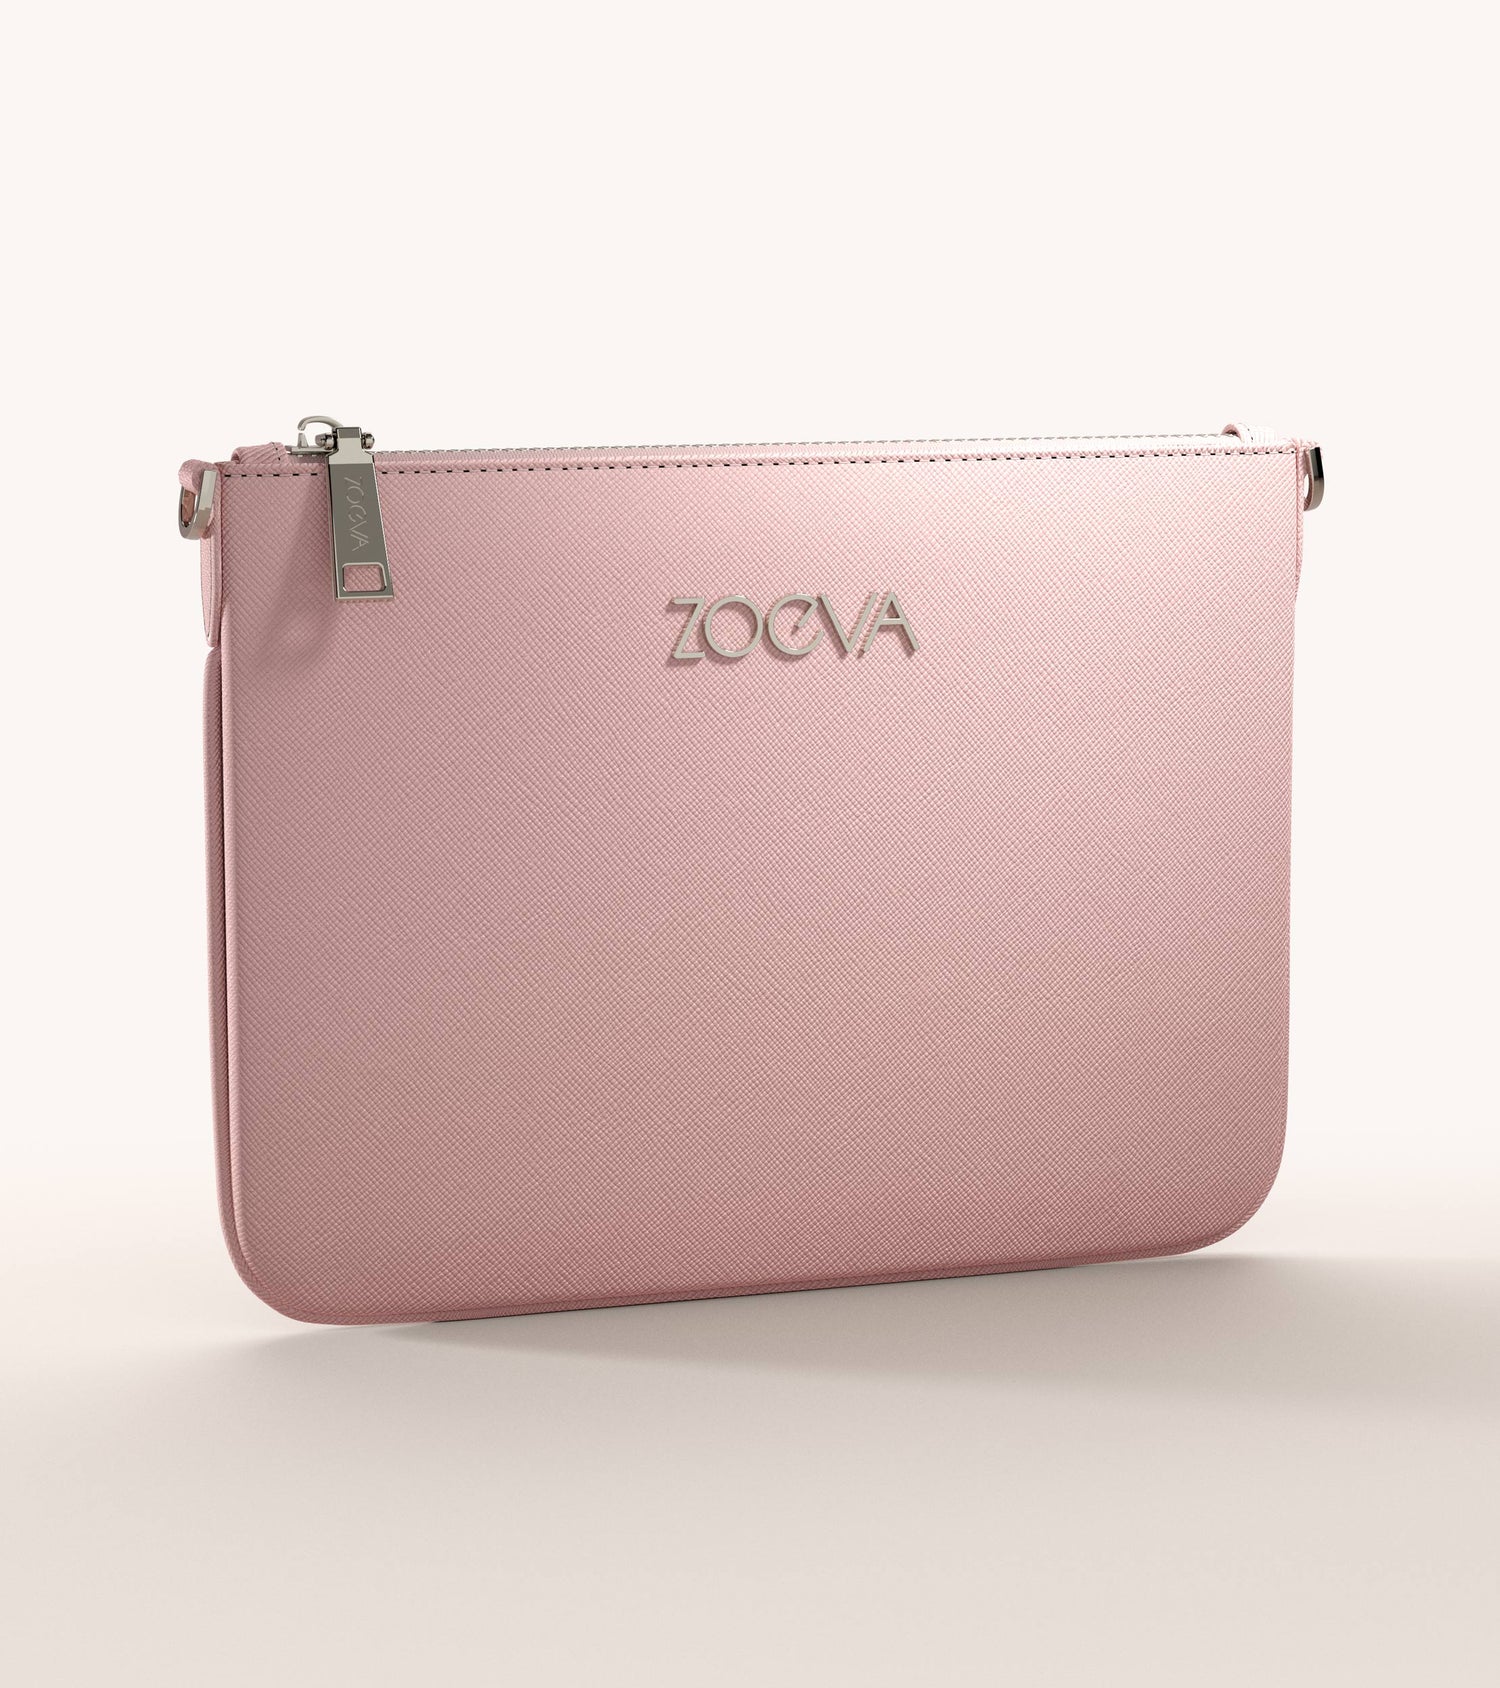 ZOEVA - The Complete Pinselset (Dusty Rose) - BRUSH SET